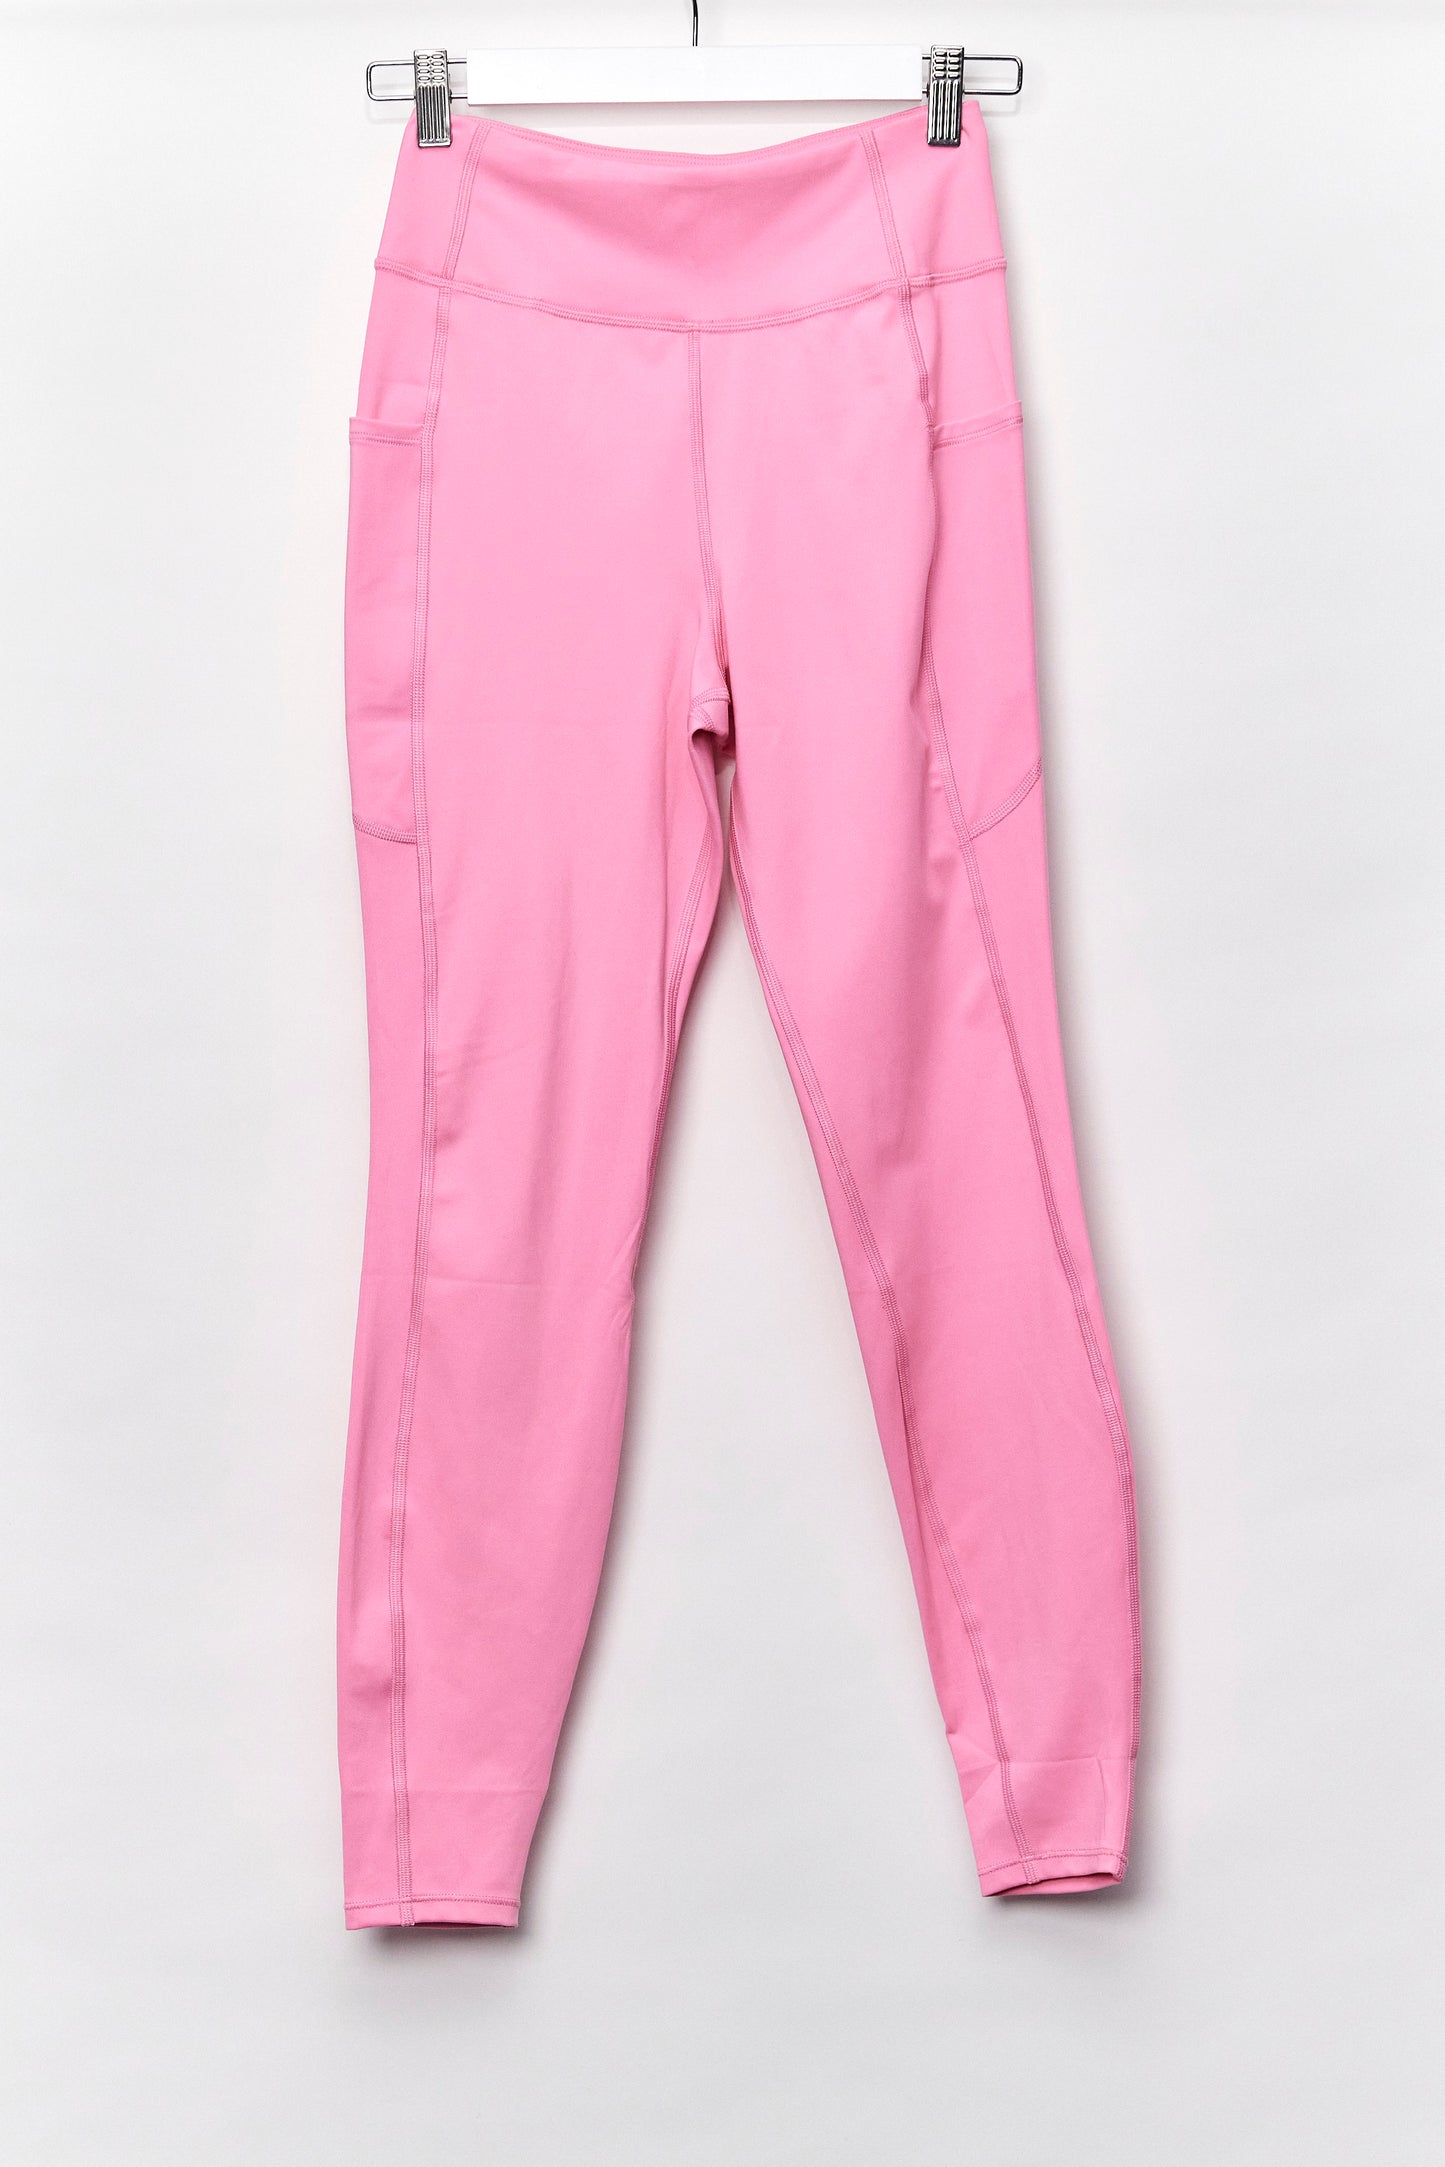 Womens Pink Sport Legging Size Small